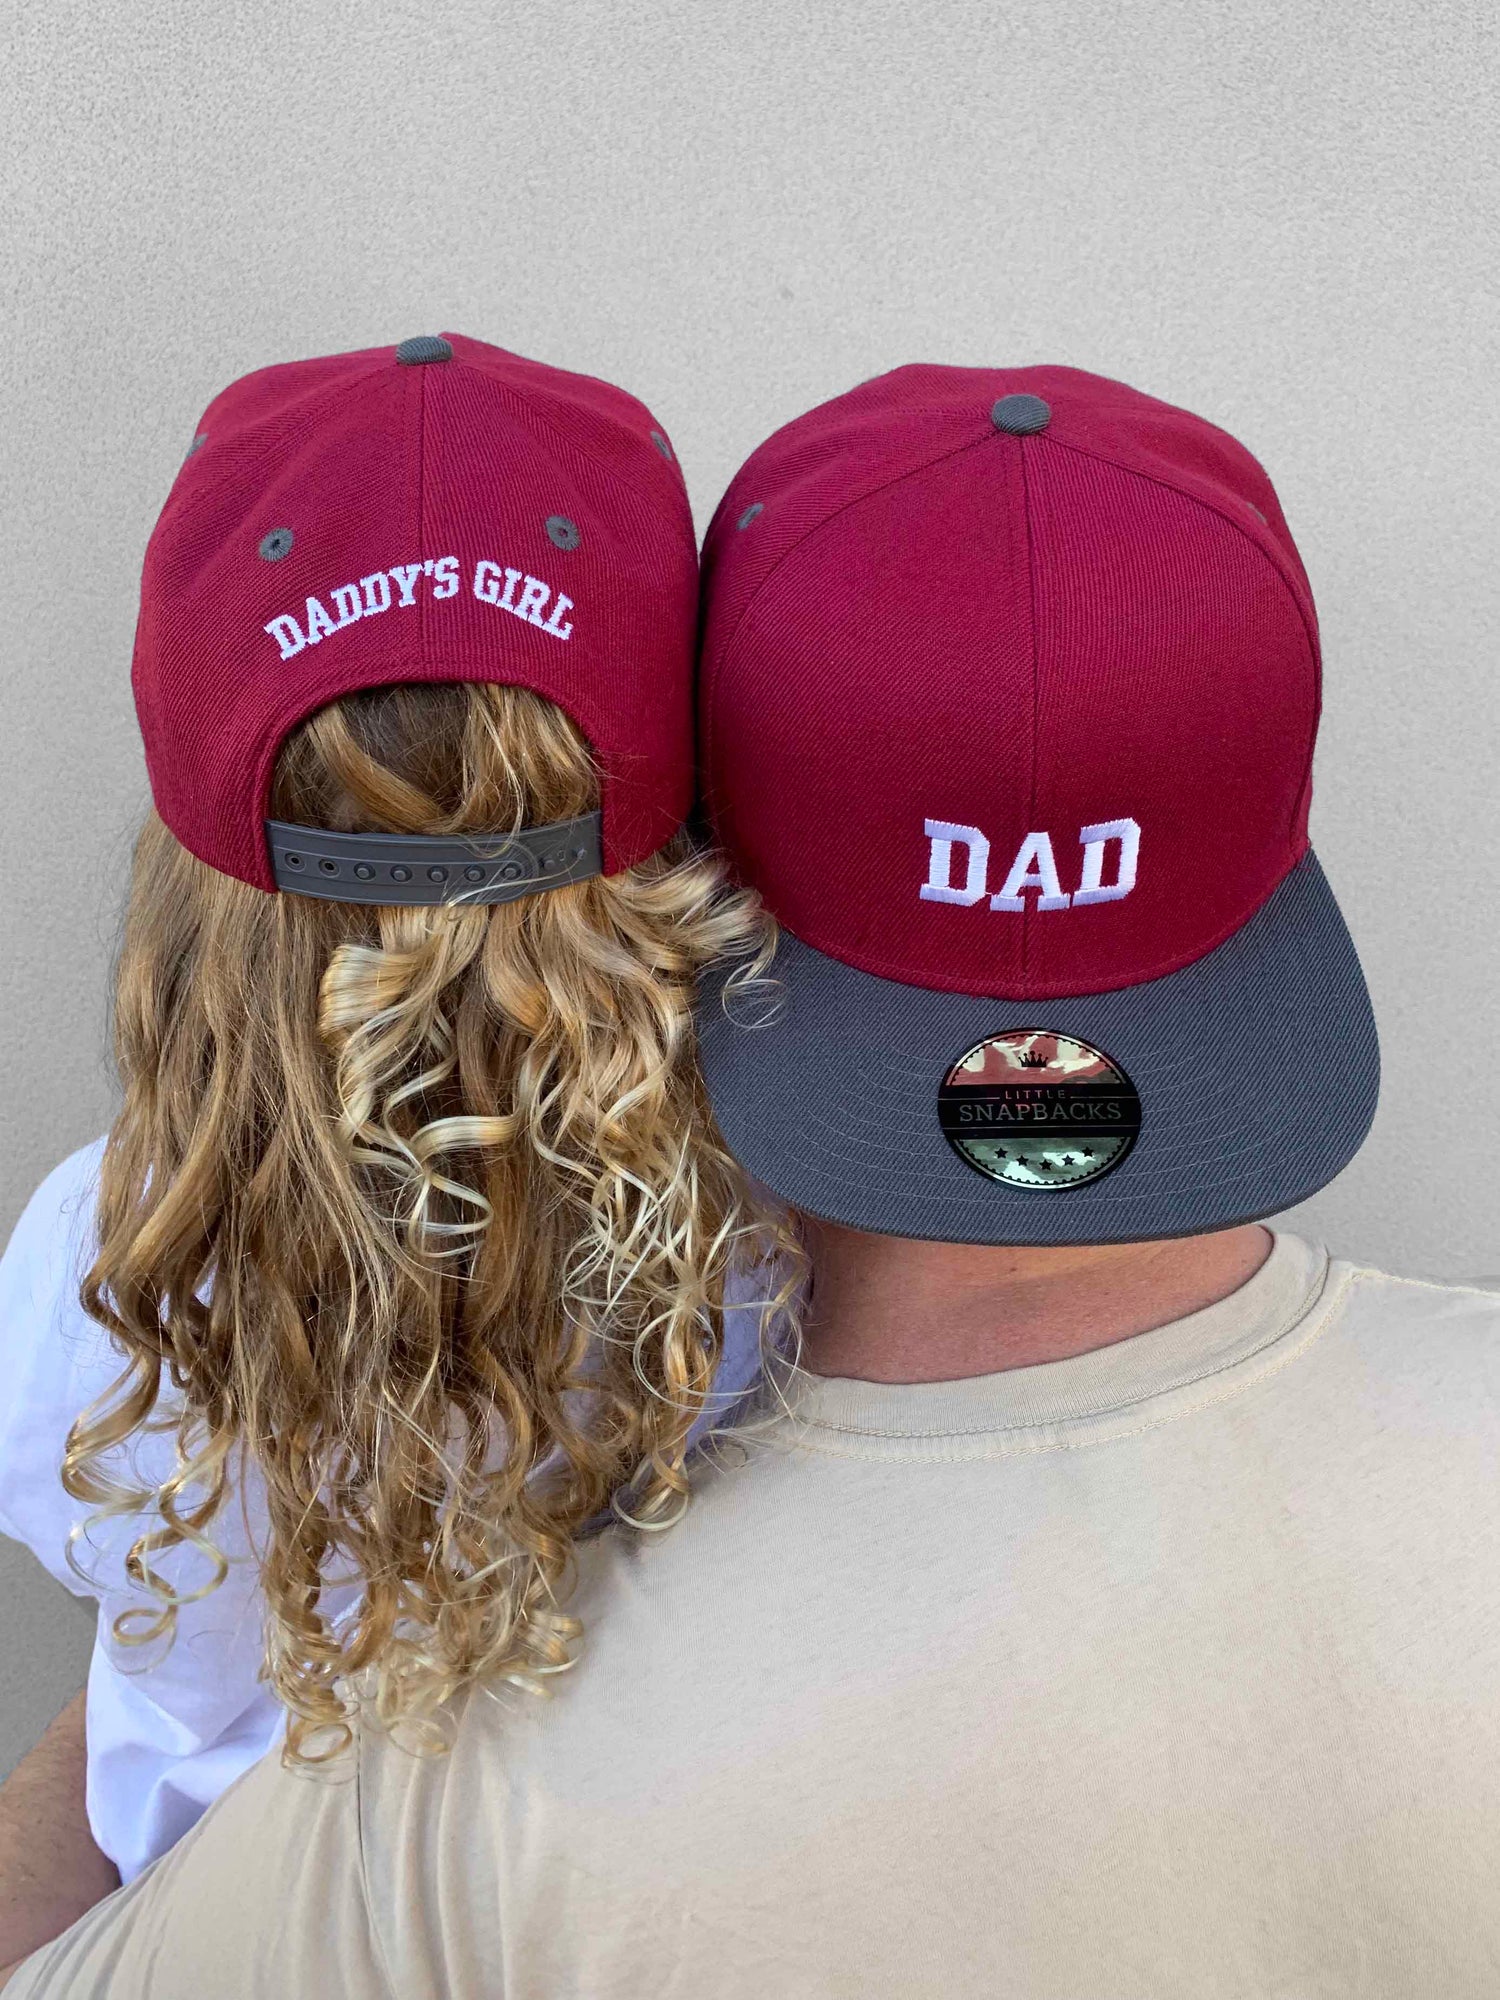 Matching Daddy Daughter hats - Daddys girl - Fathers Day Gifts